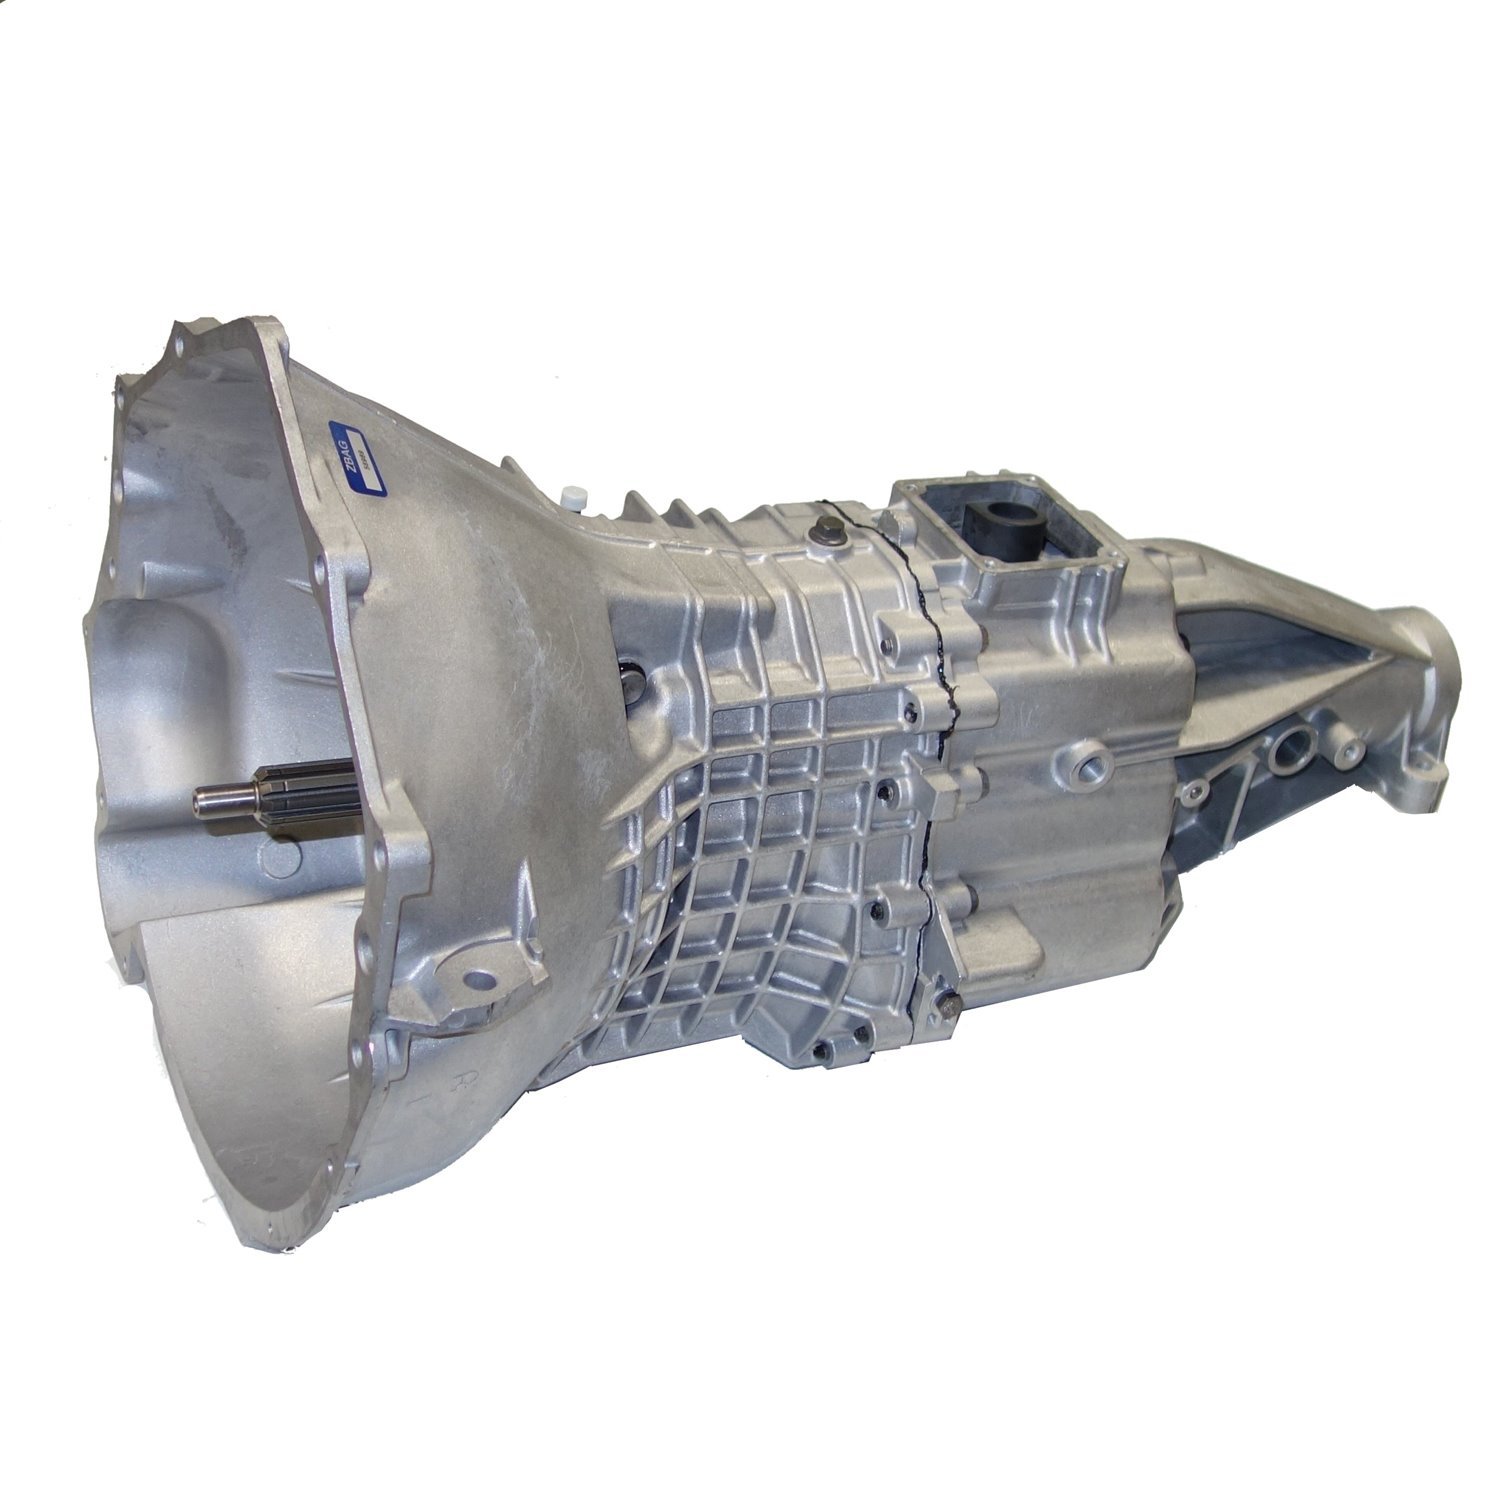 Remanufactured HM290 Manual Transmission for GM 96-98 1500, 5 Speed